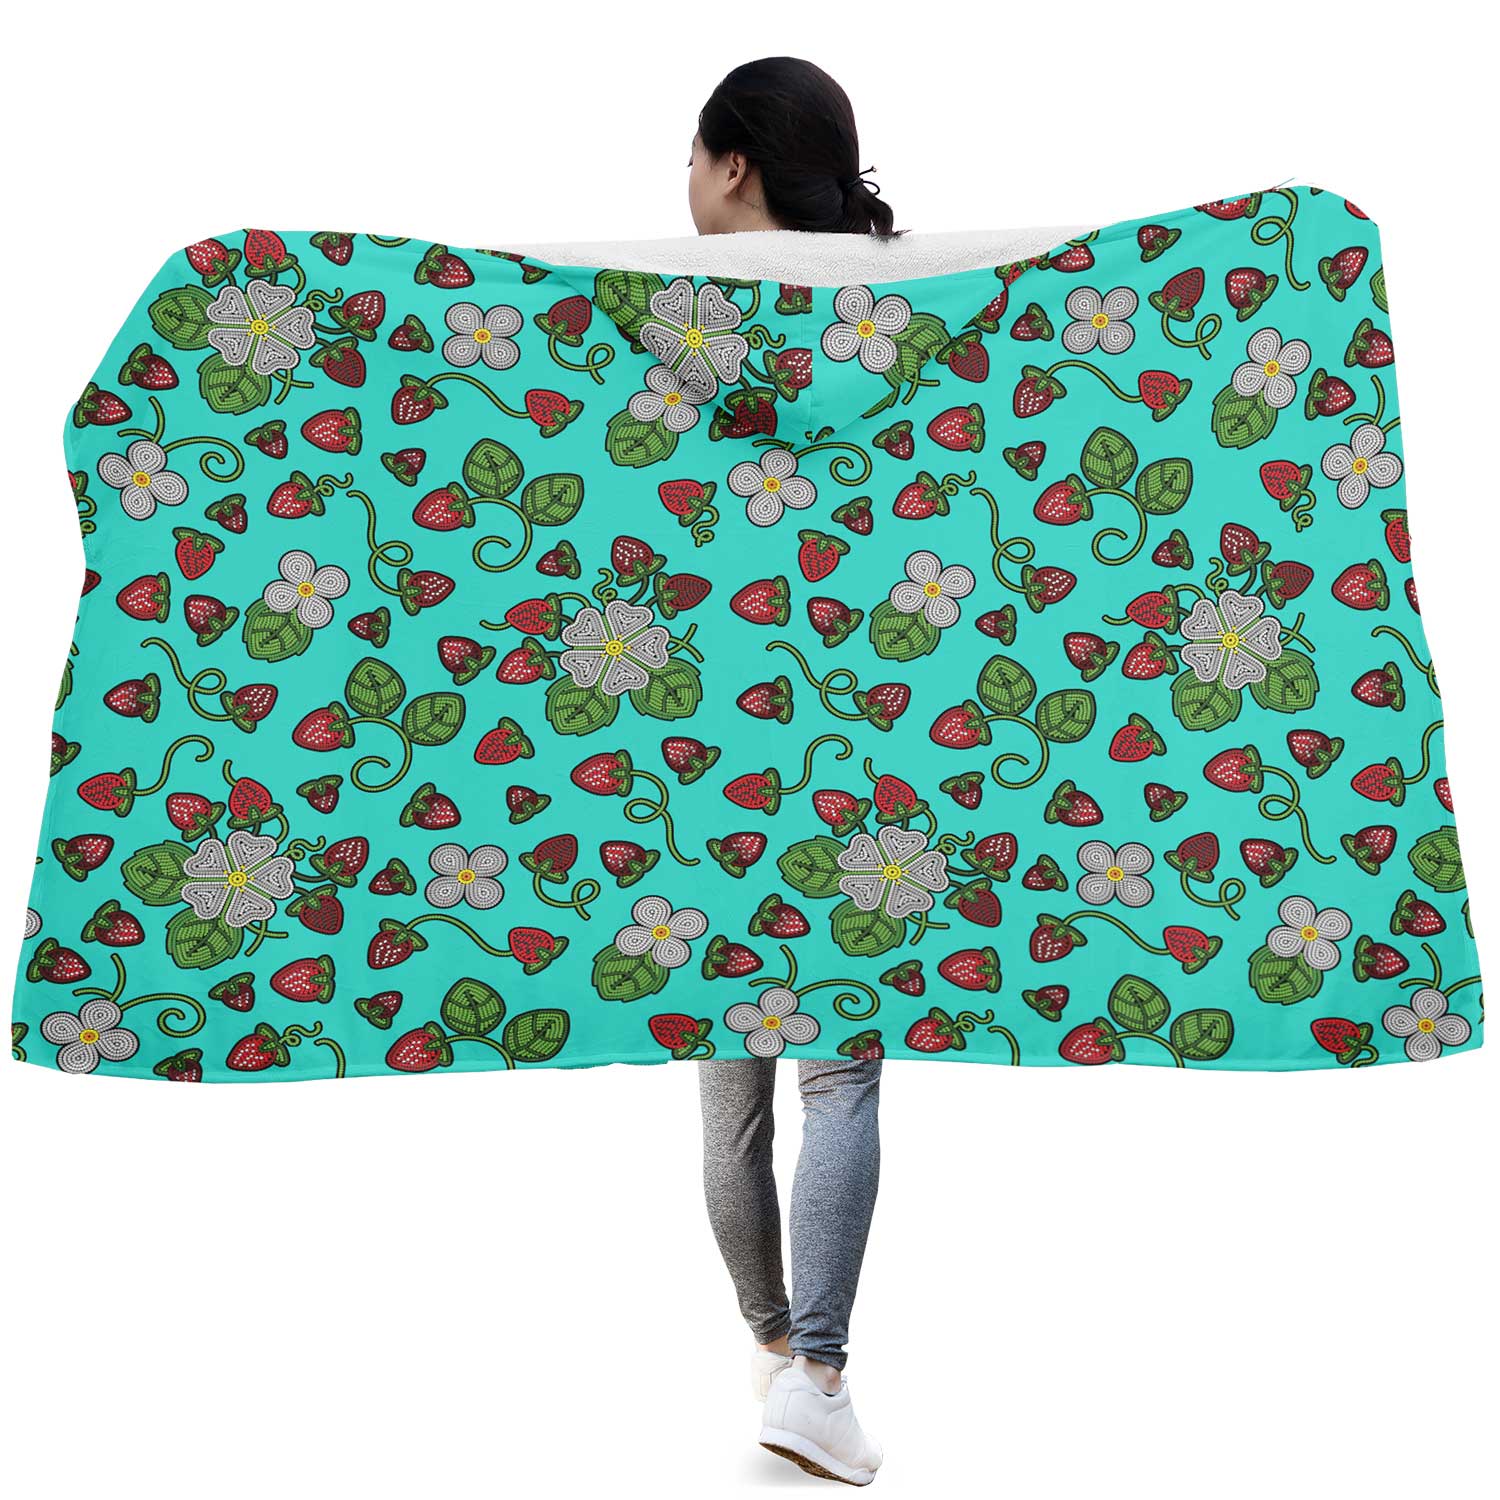 Strawberry Dreams Turquoise Hooded Blanket